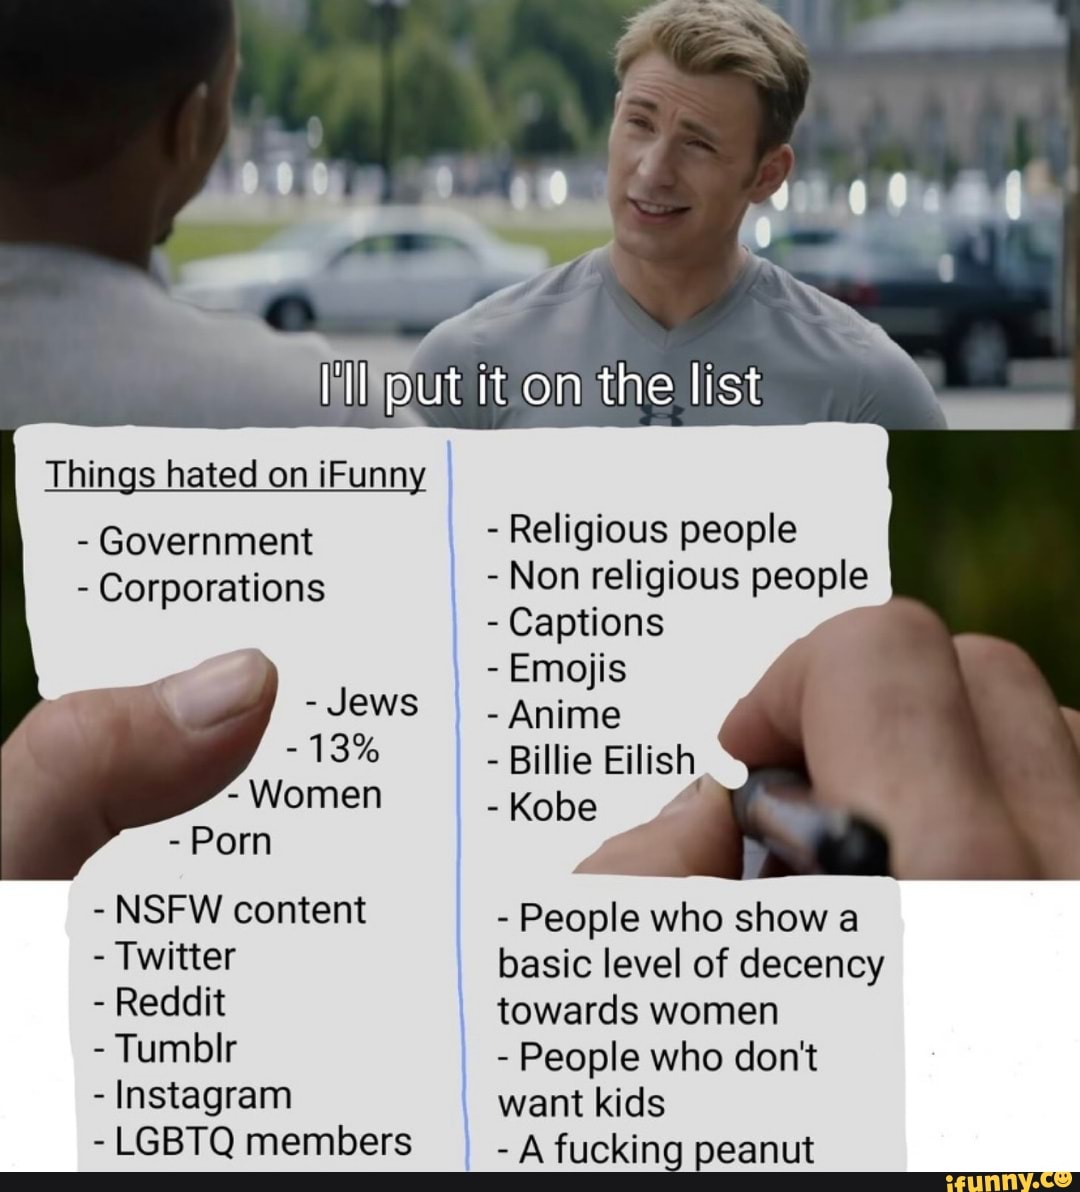 Jew Porn Captions - Things hated on iFunny Government Corporations Jews Women Porn NSFW content  Twitter Reddit Instagram LGBTQ members